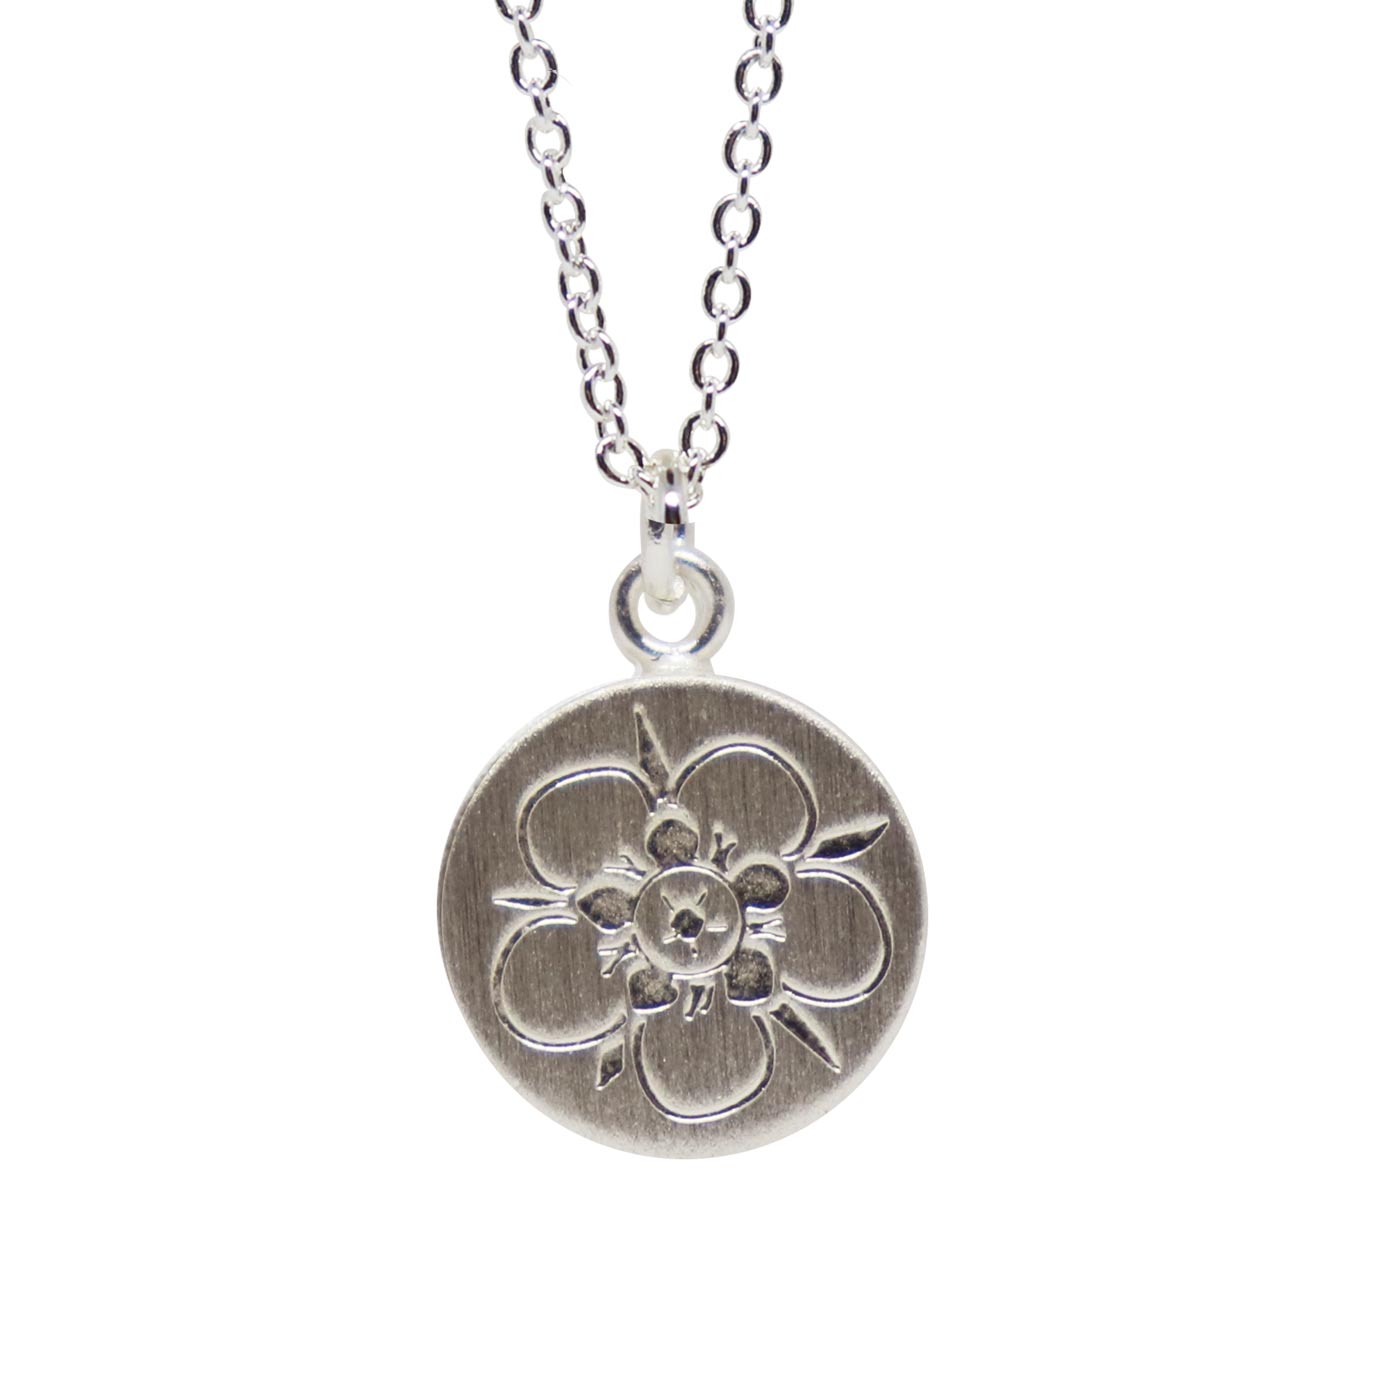 Keke Silver Magical Manuka flower etched silver necklace NZ jewellery